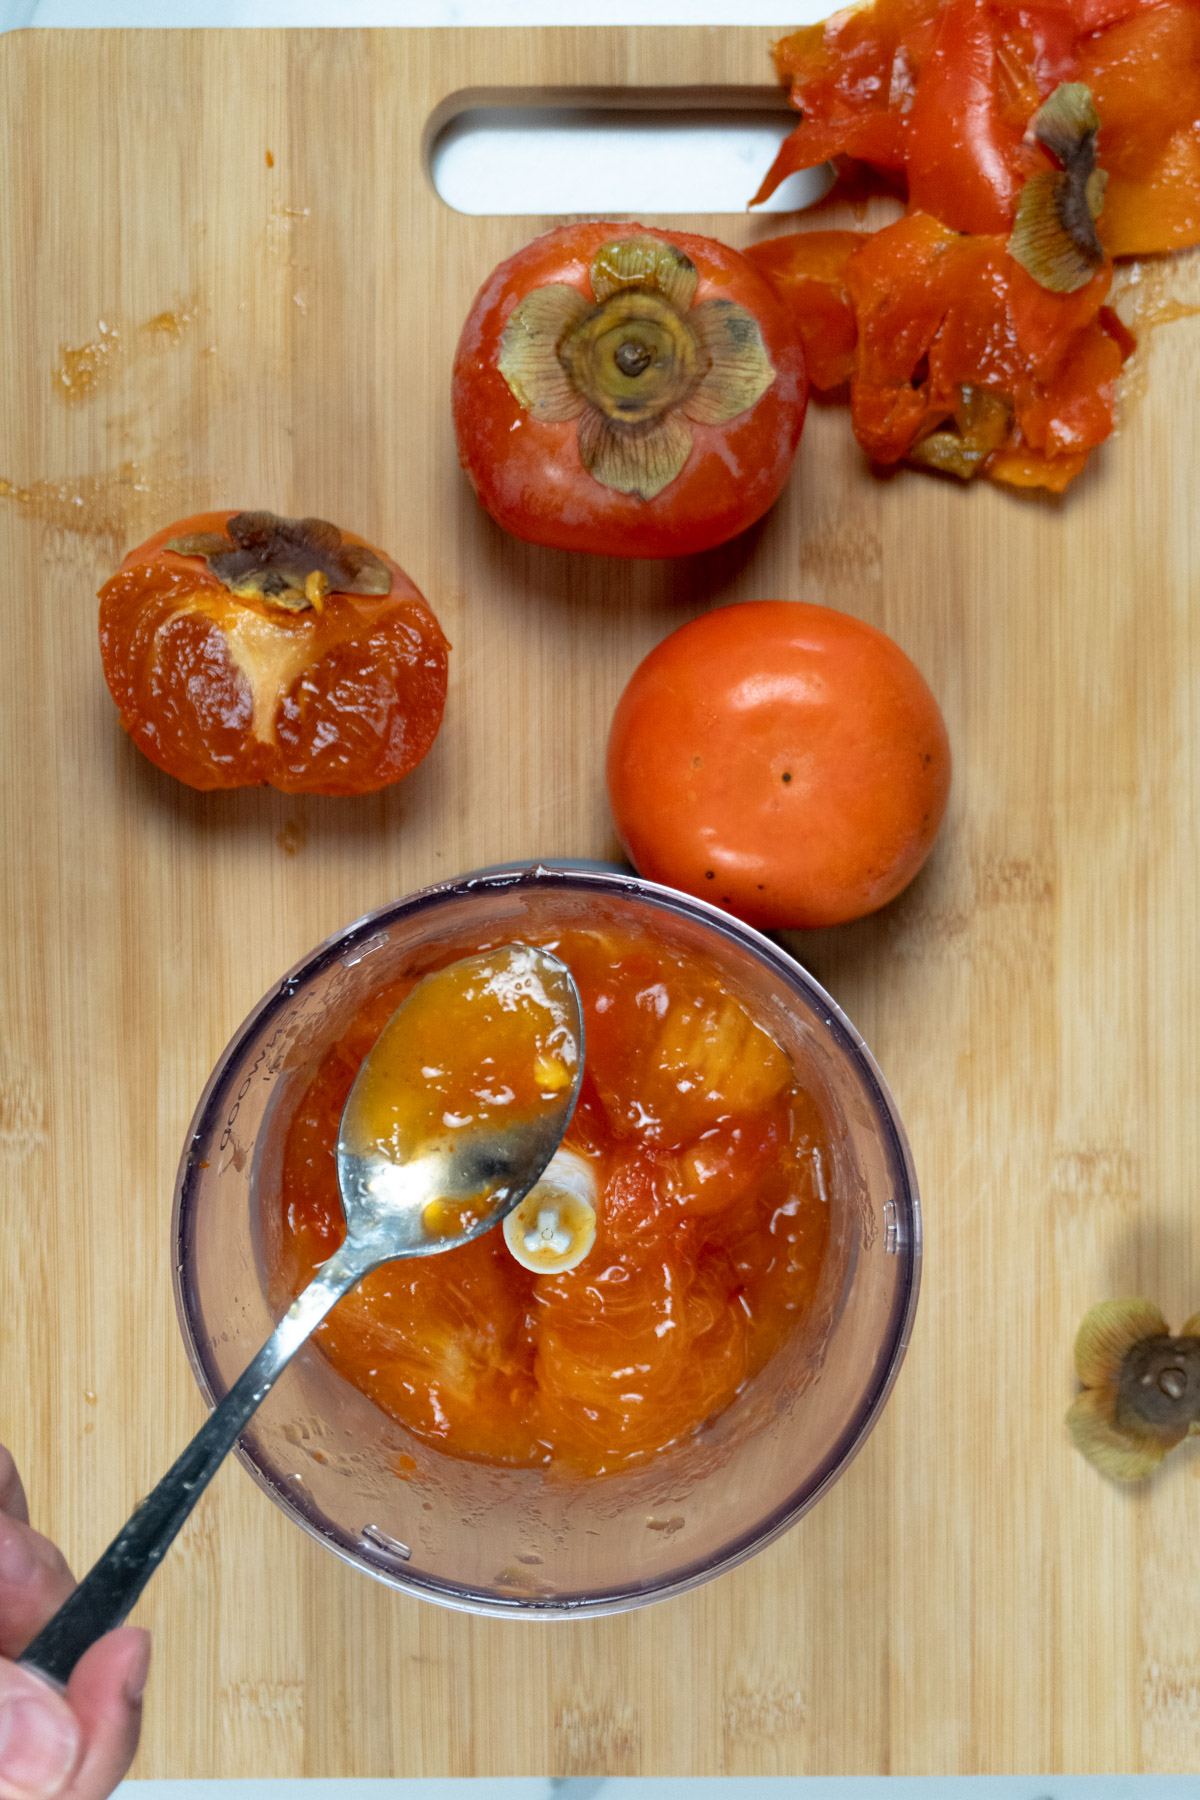 placing persimmon flesh into a blender